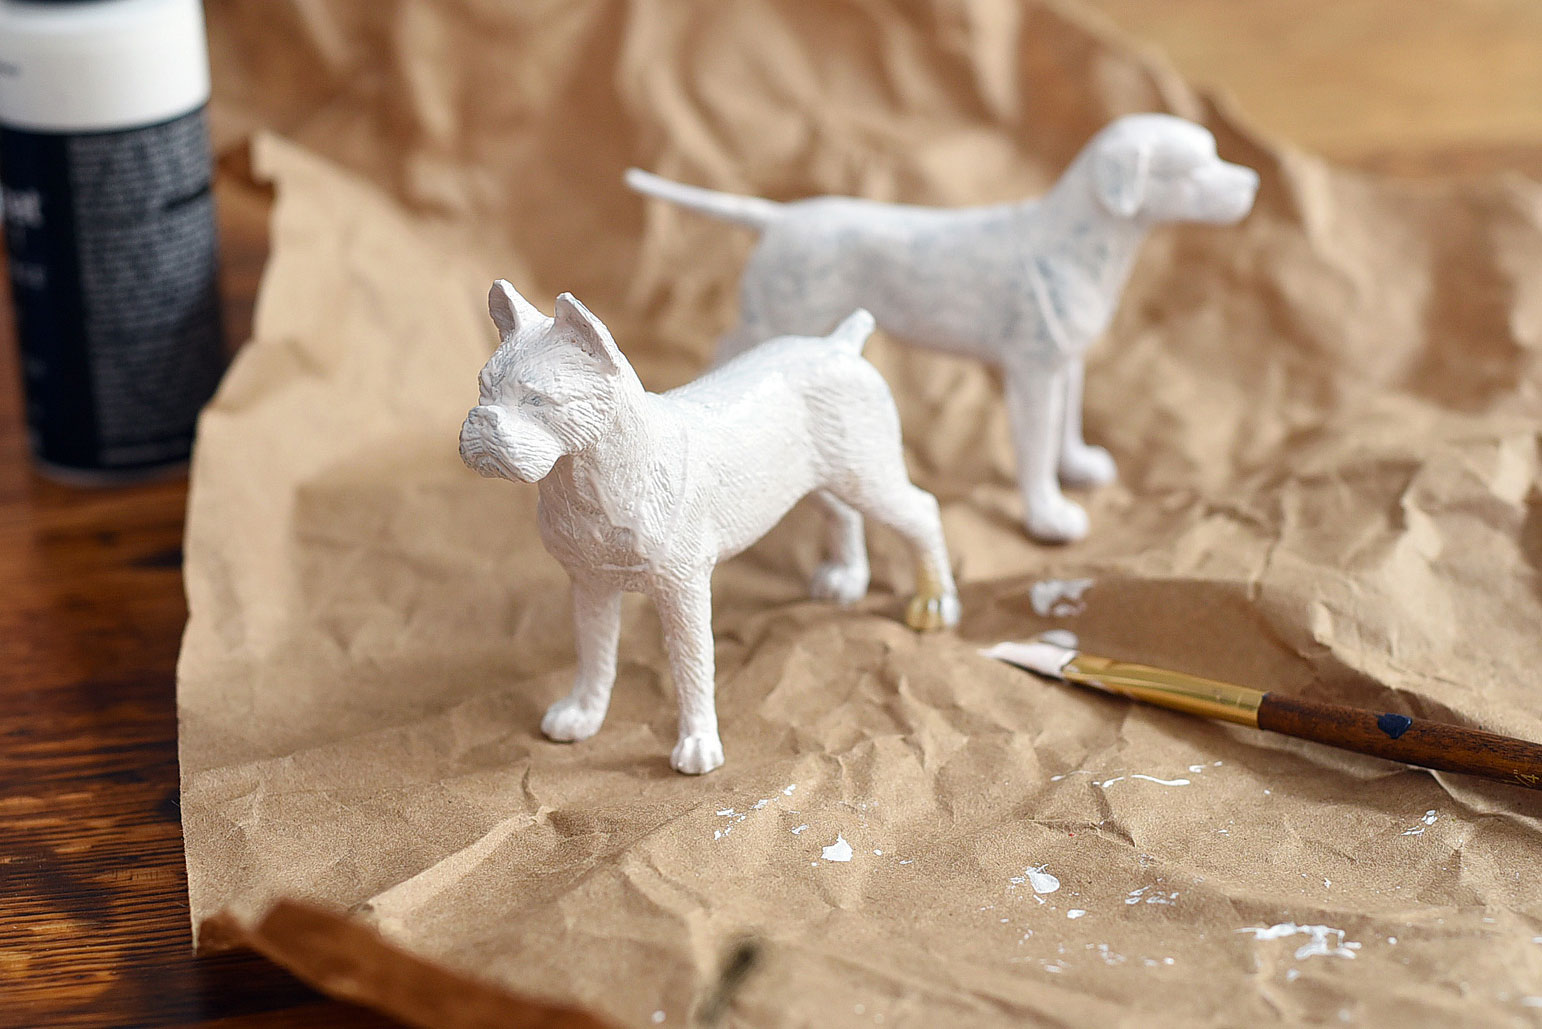 Looking for a way to include your pup in your wedding or simply express your canine love to your guests? These DIY dog wedding cake toppers are affordable, fun, and relatively easy to make!